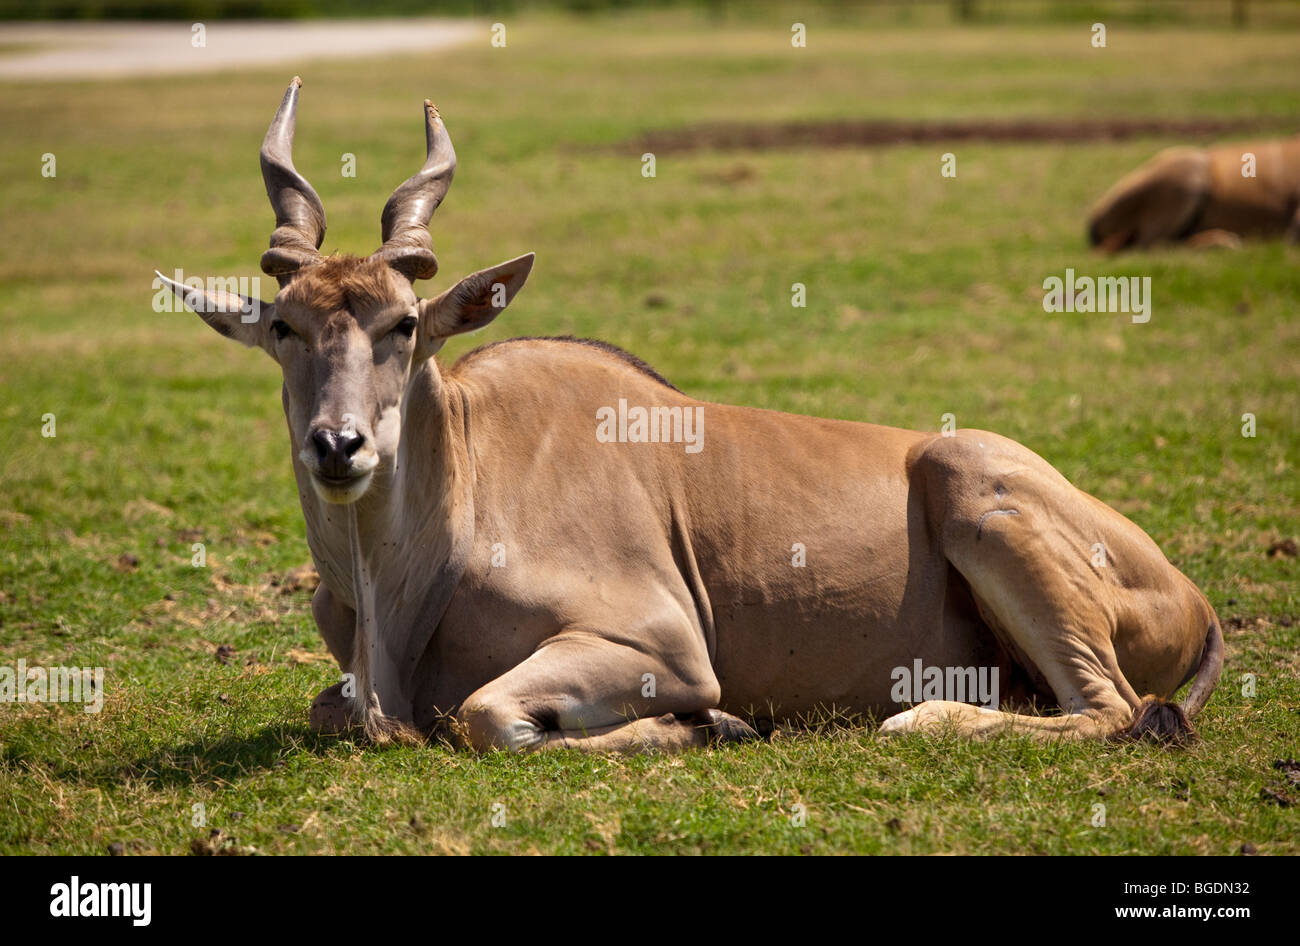 Eland, Taurotragus oryx, is the largest member of the Antelope family and is a native of Africa. Stock Photo